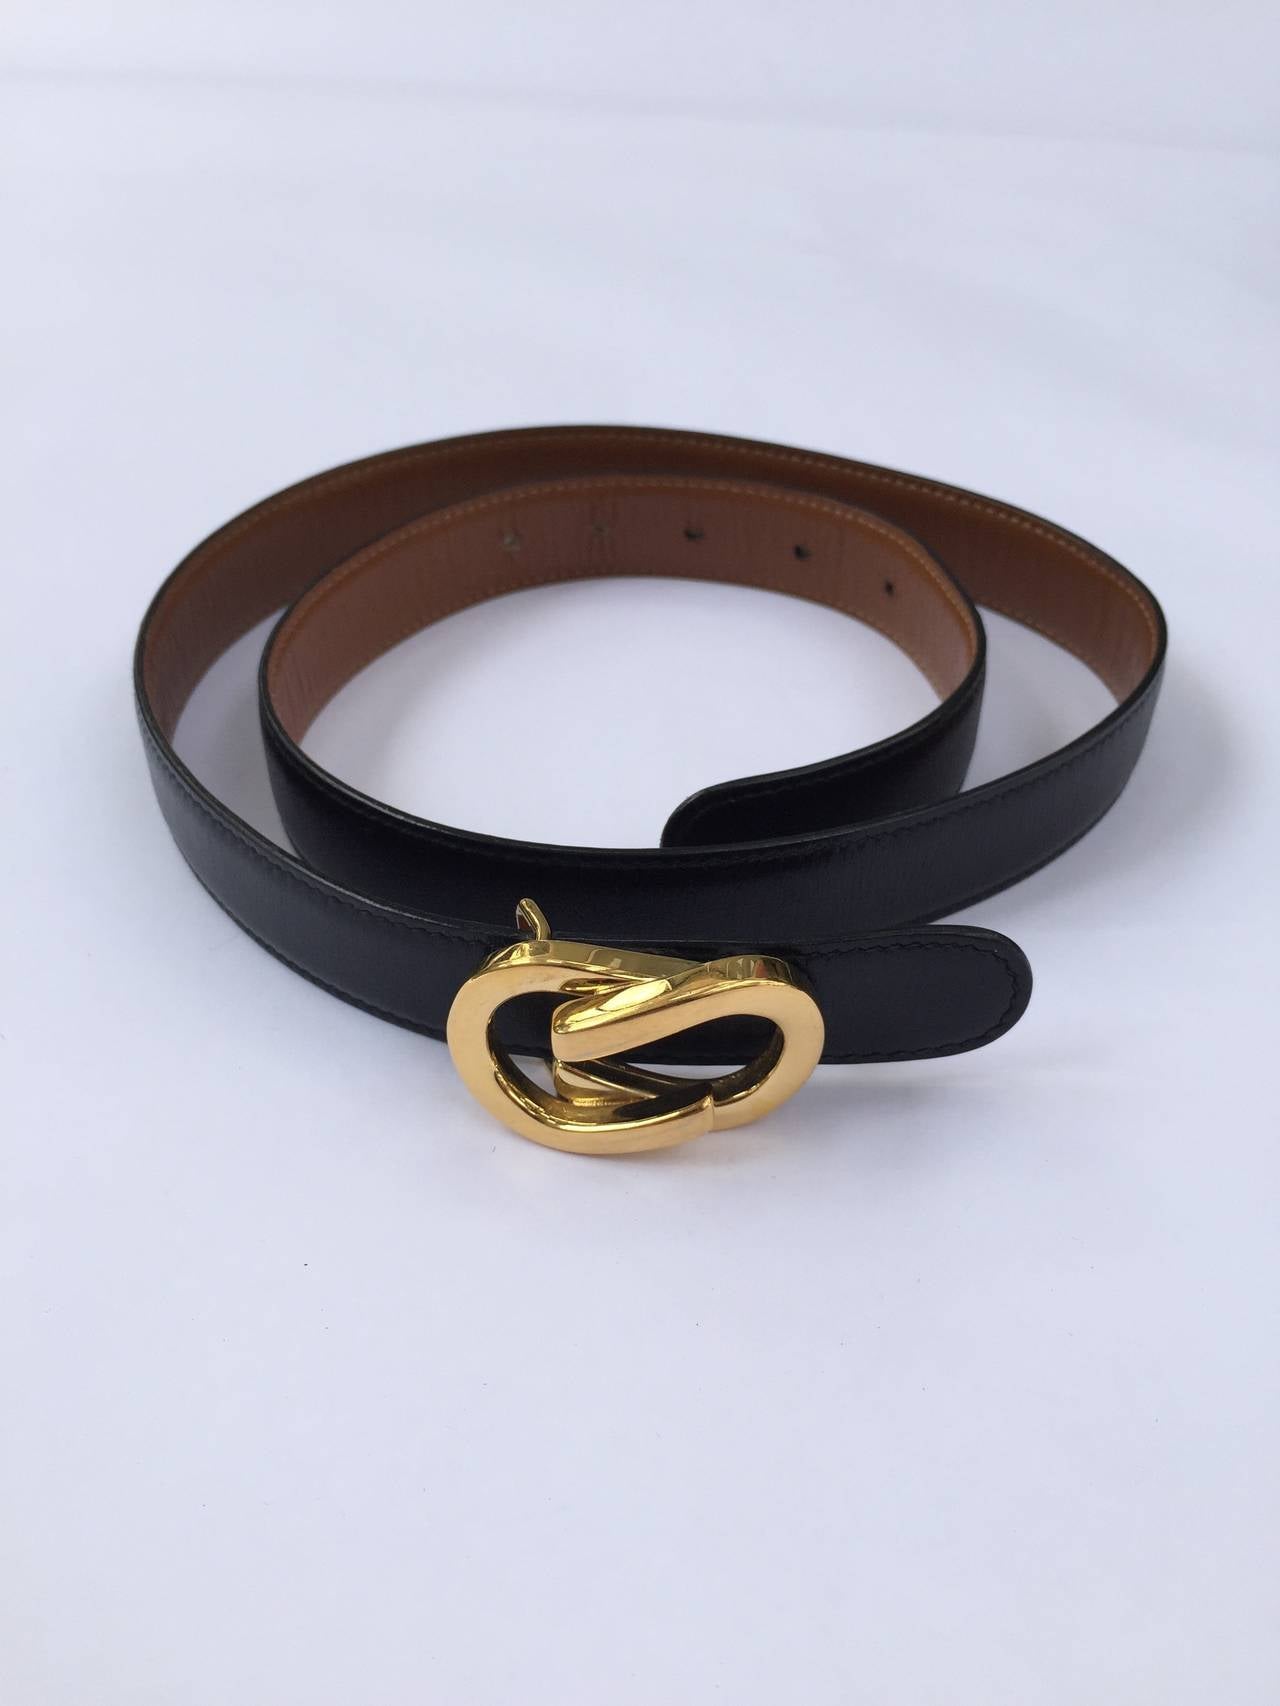 Gucci gold buckle on black leather strap made in Italy.
80-32
39